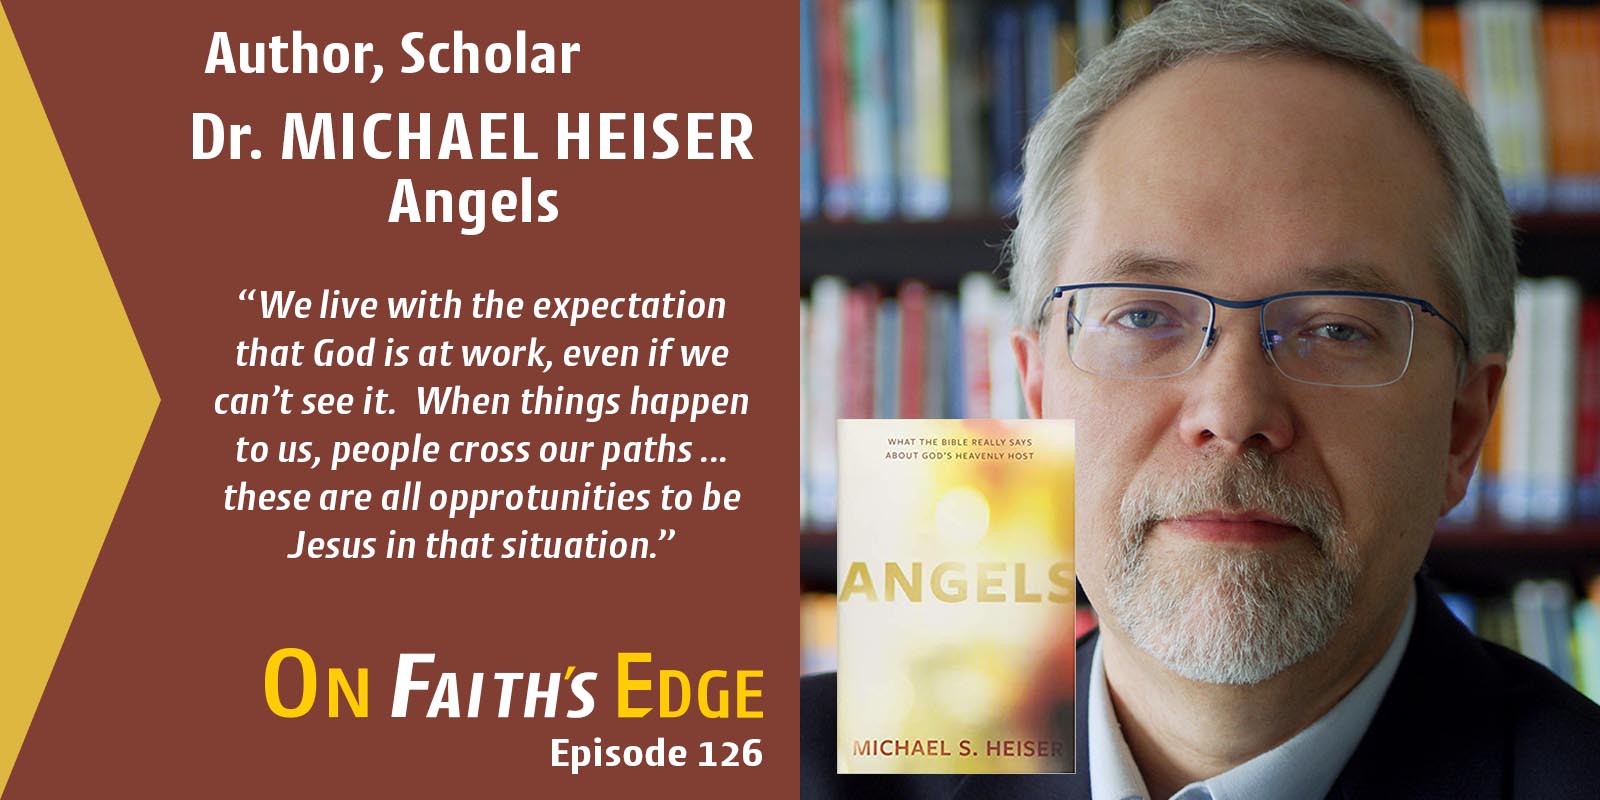 What are Angels? | Dr. Michael Heiser